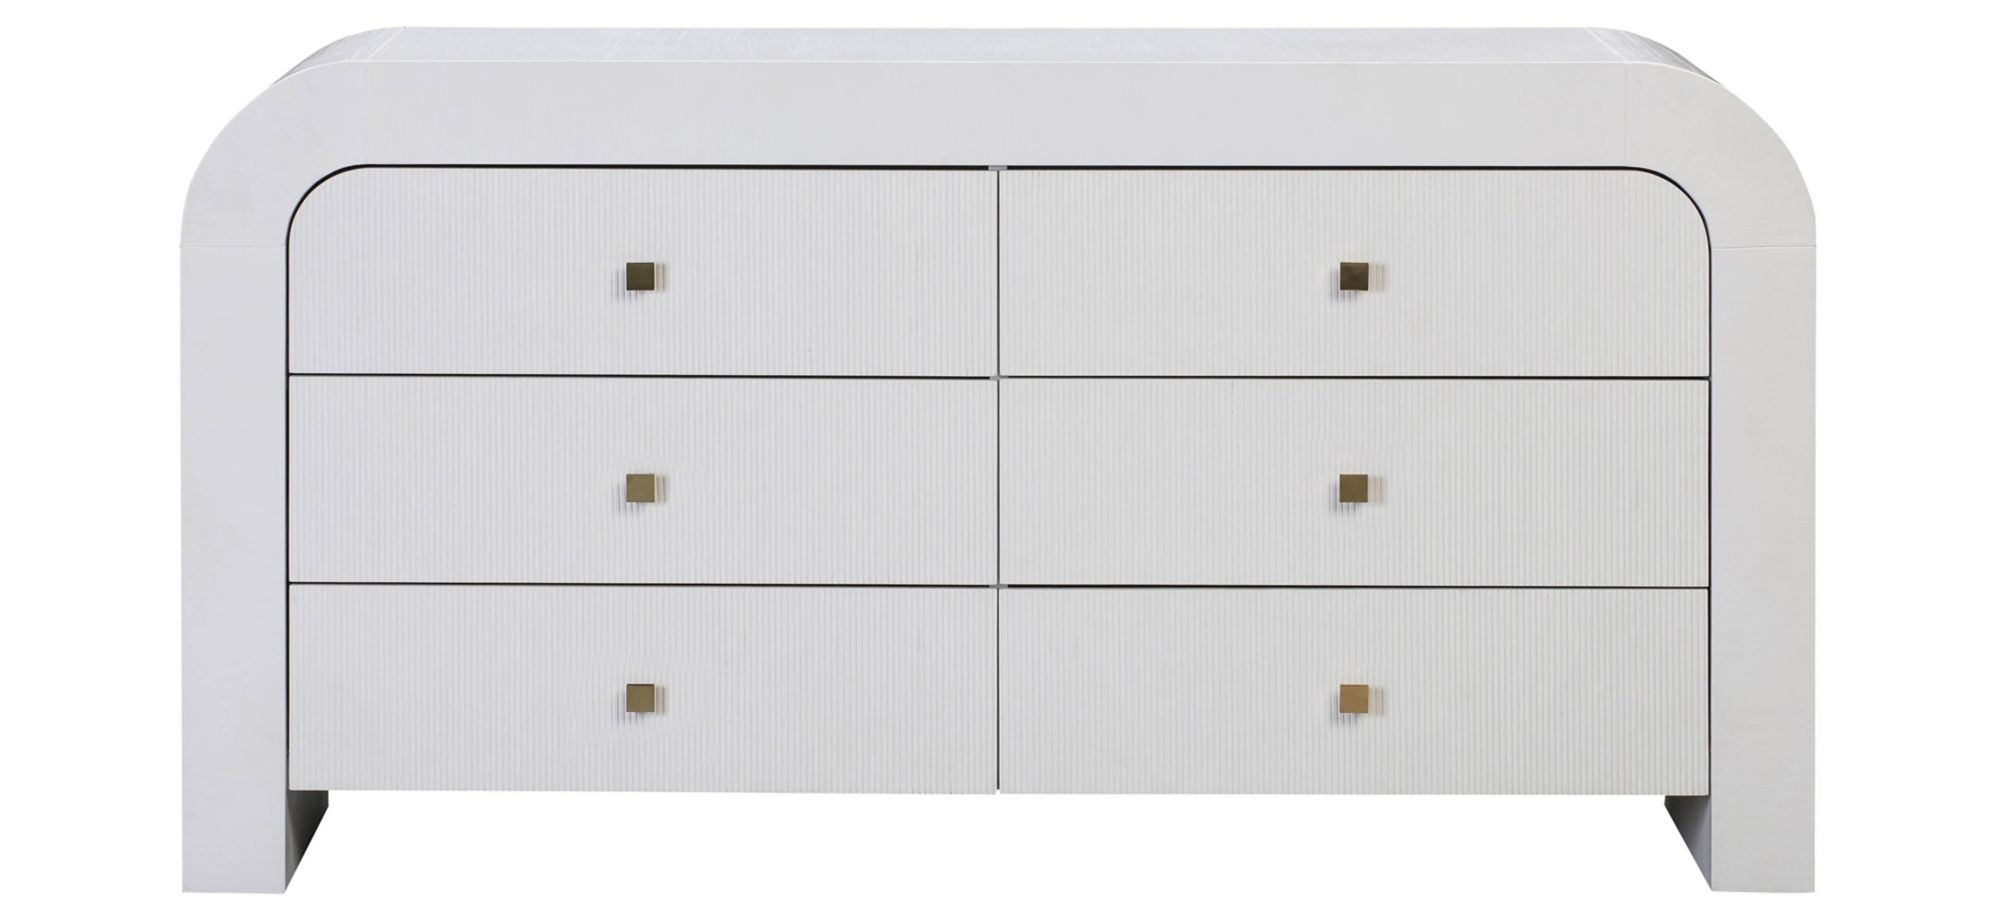 Hump 6 Drawer Dresser in White by Tov Furniture